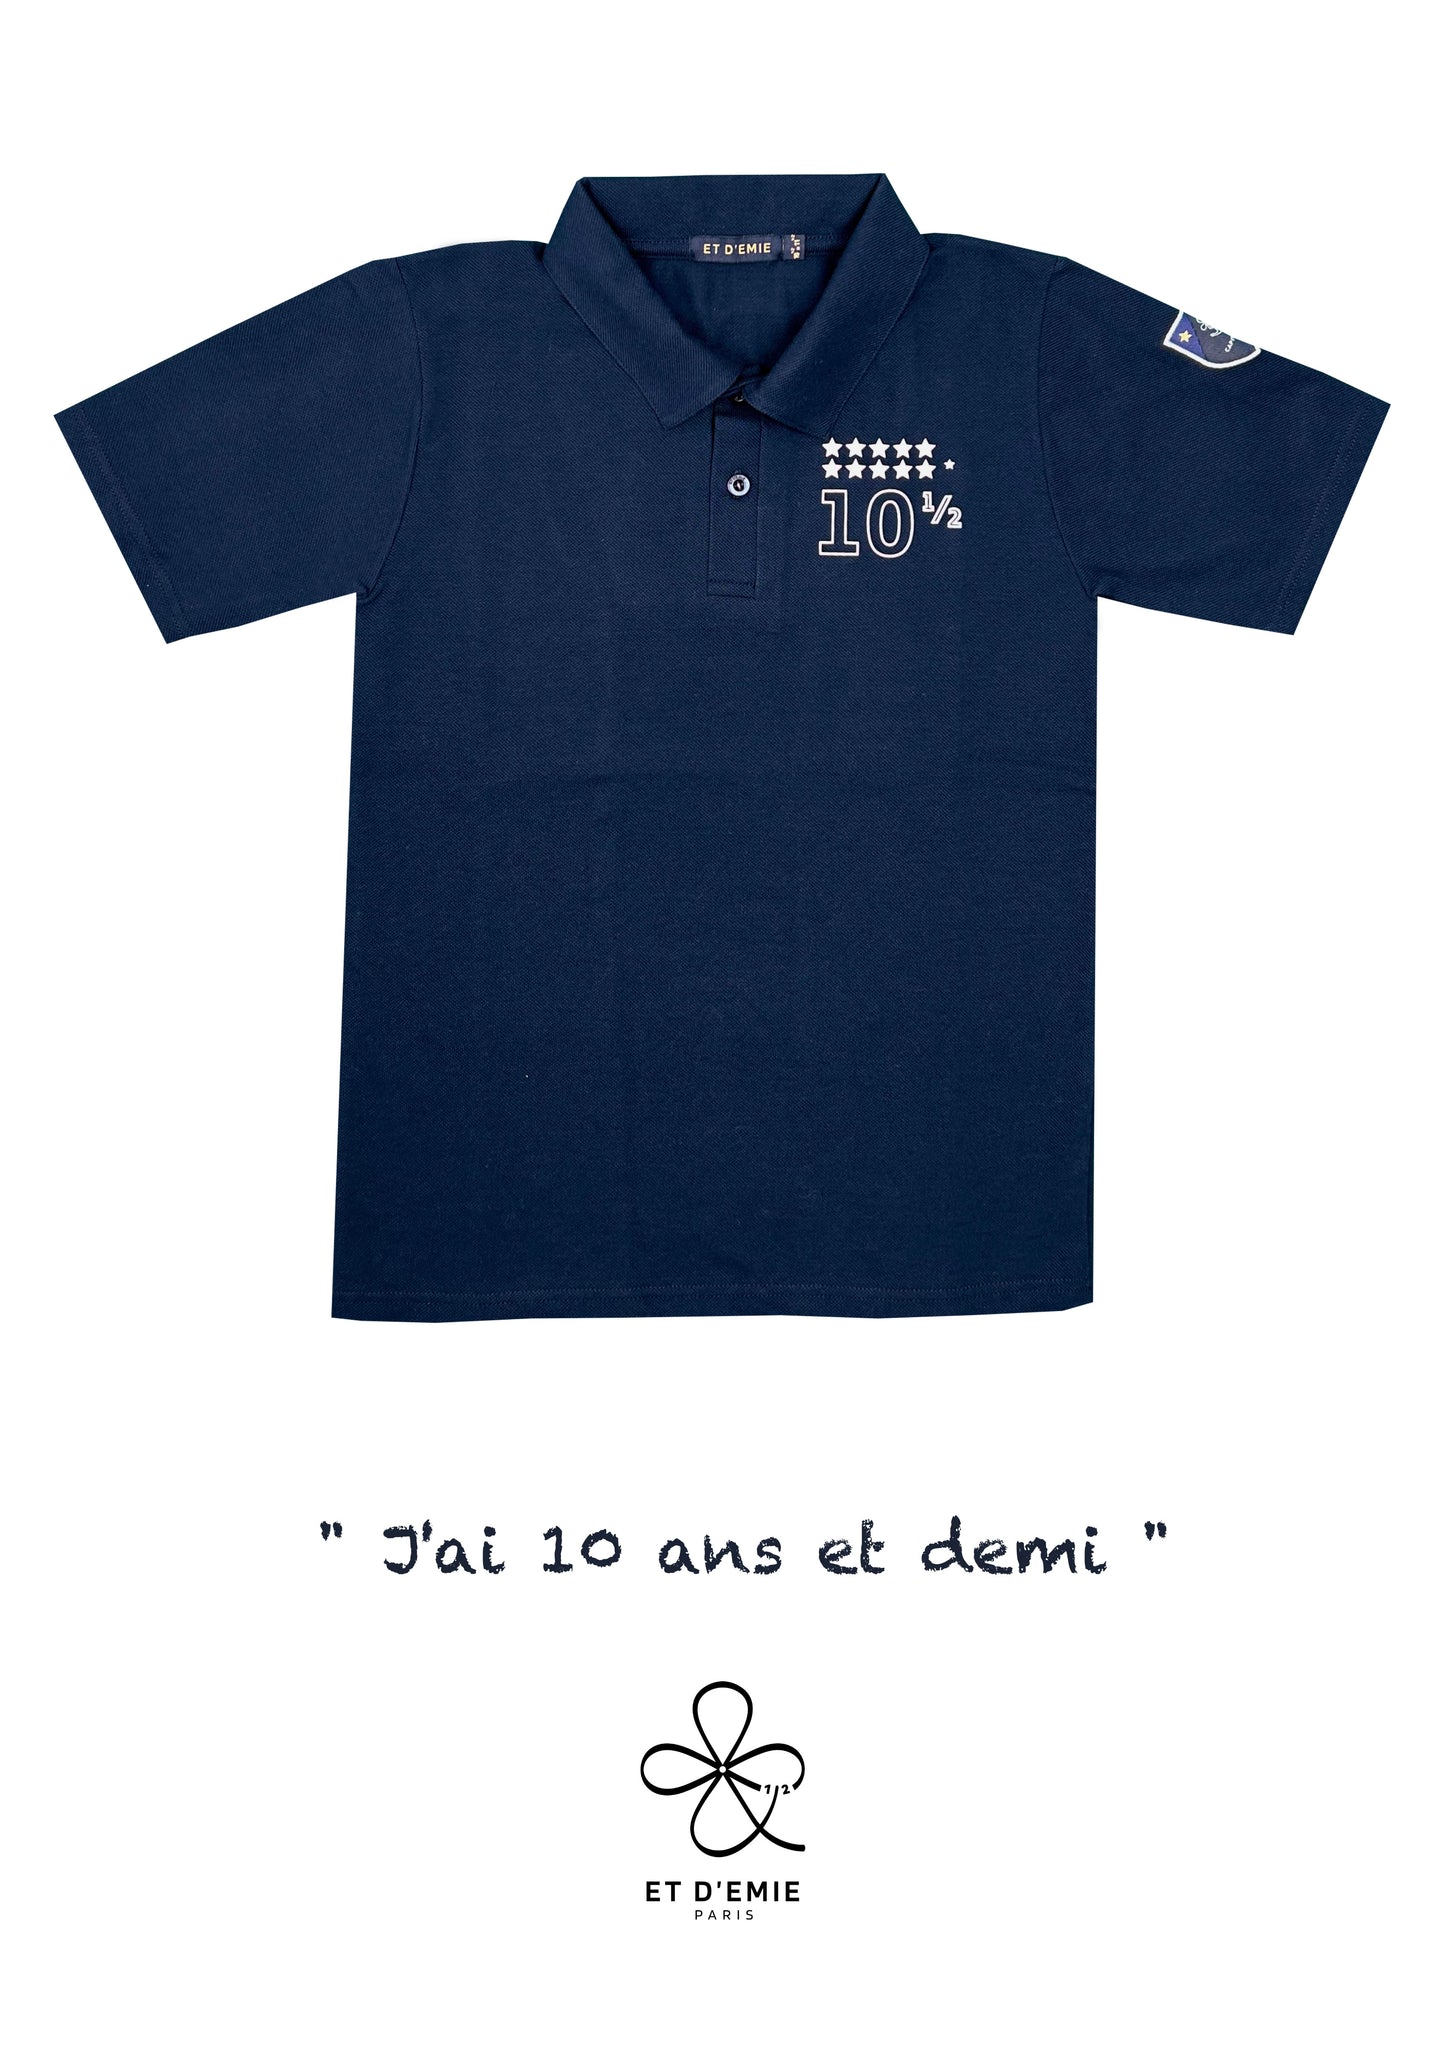 MINI CAPTAIN - SOUL REBELLE polo shirt "I'm 10 and a half years old" embroidered in navy organic piqué cotton 🇫🇷